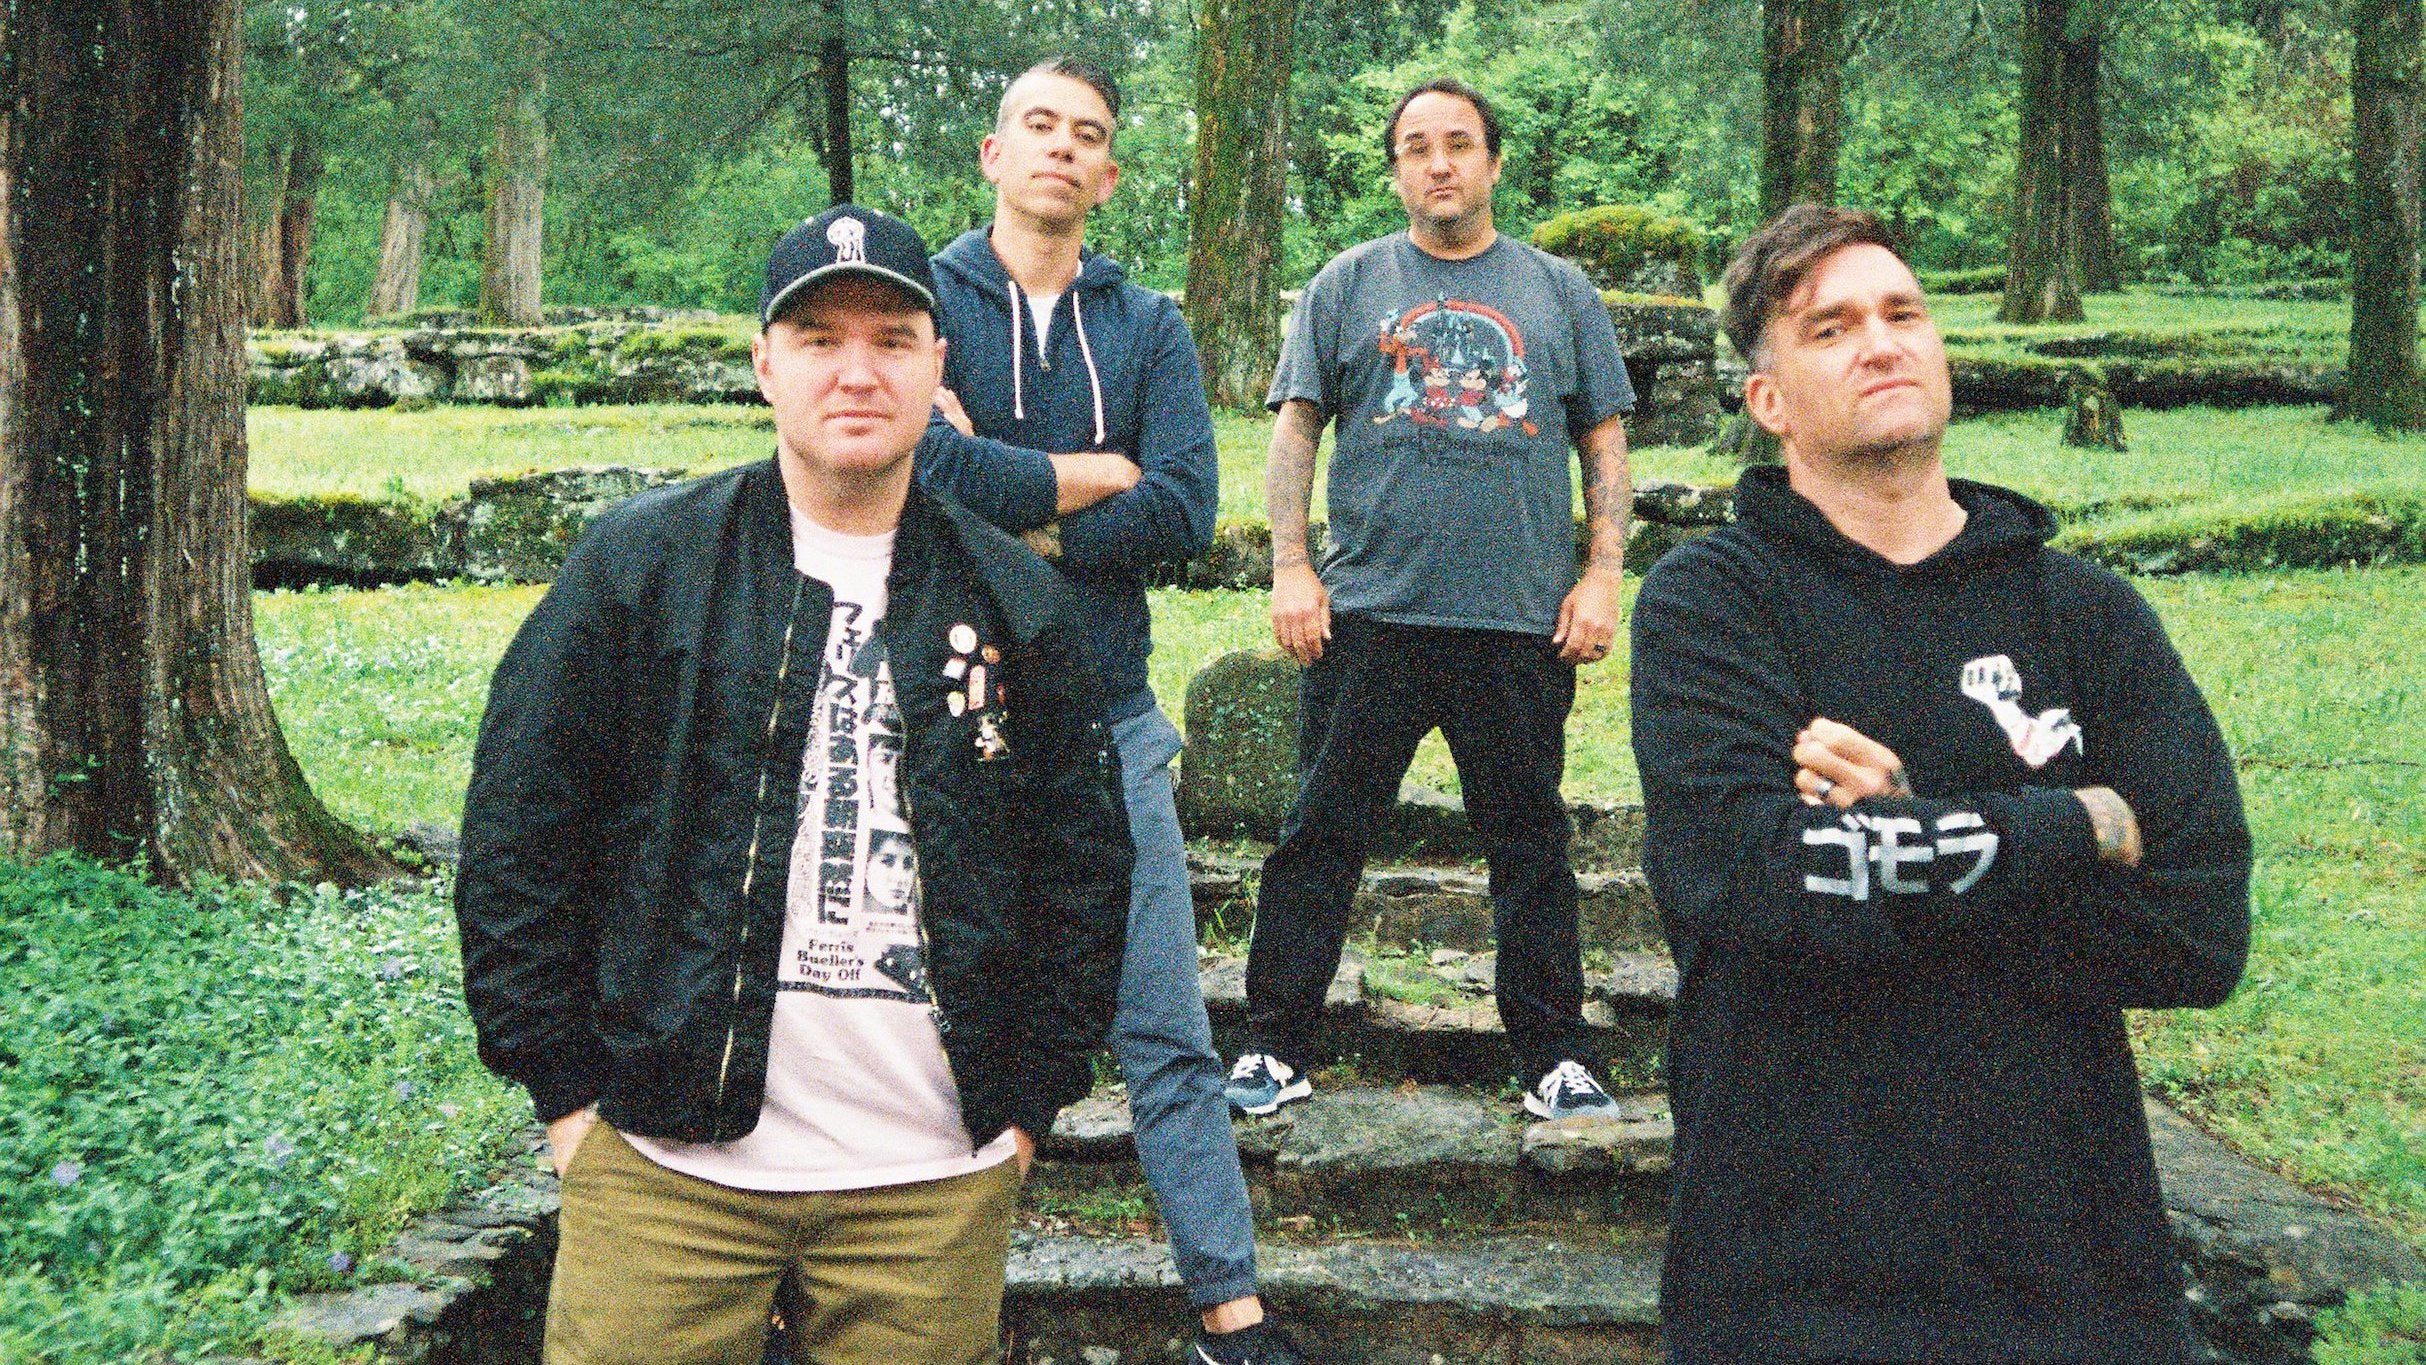 New Found Glory in San Antonio promo photo for Official Platinum Onsale presale offer code